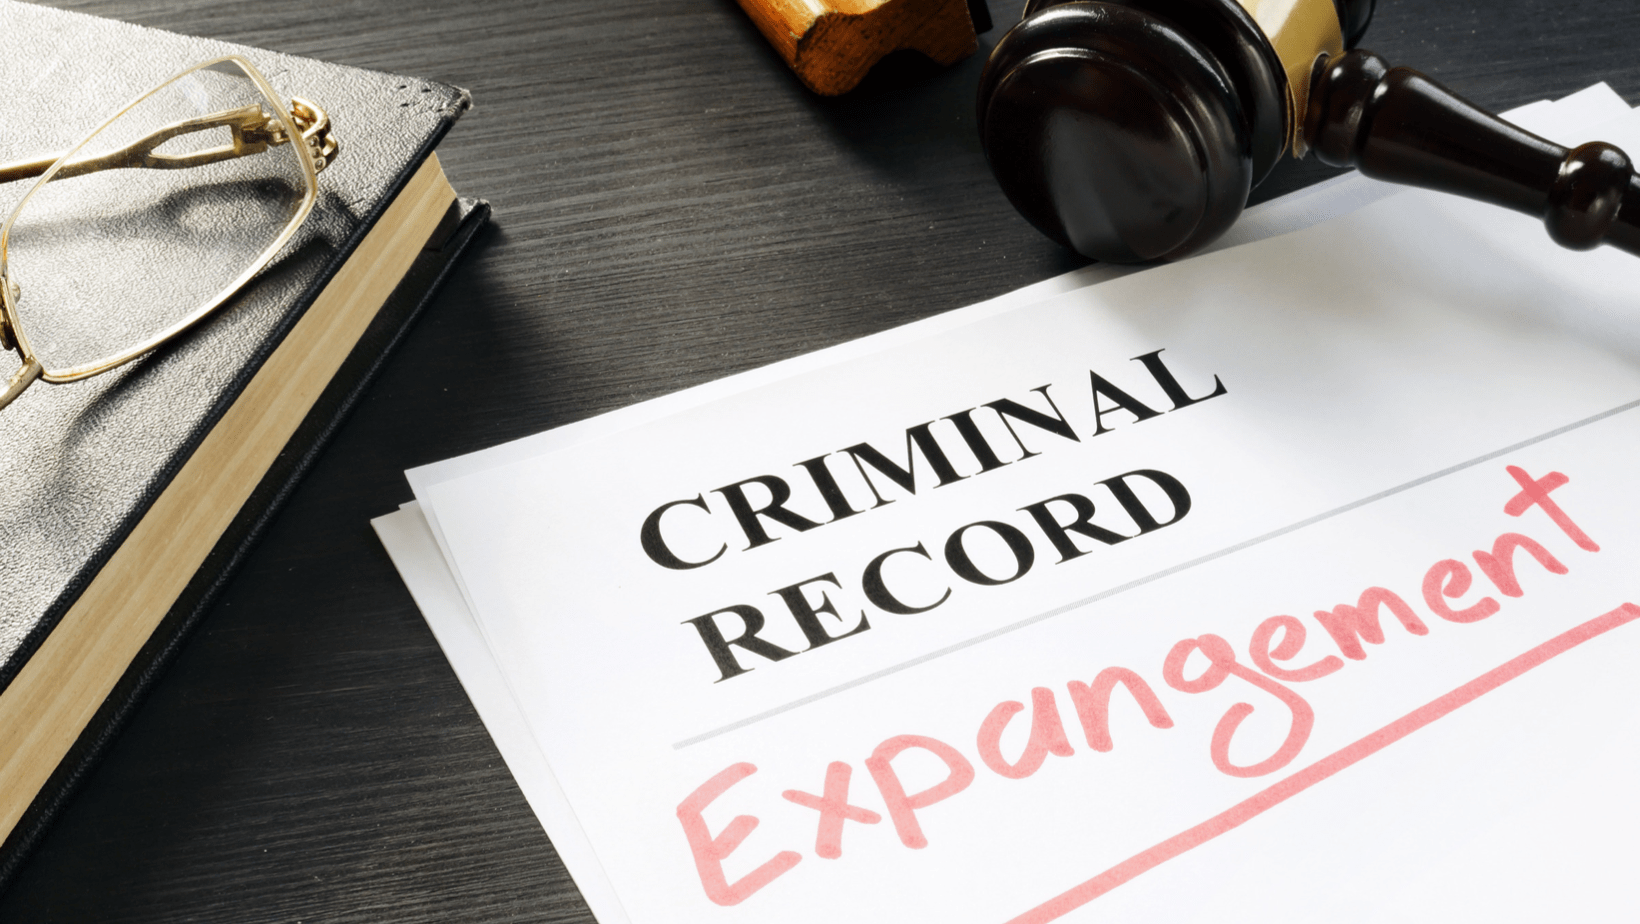 Annulled convictions vs expungement 